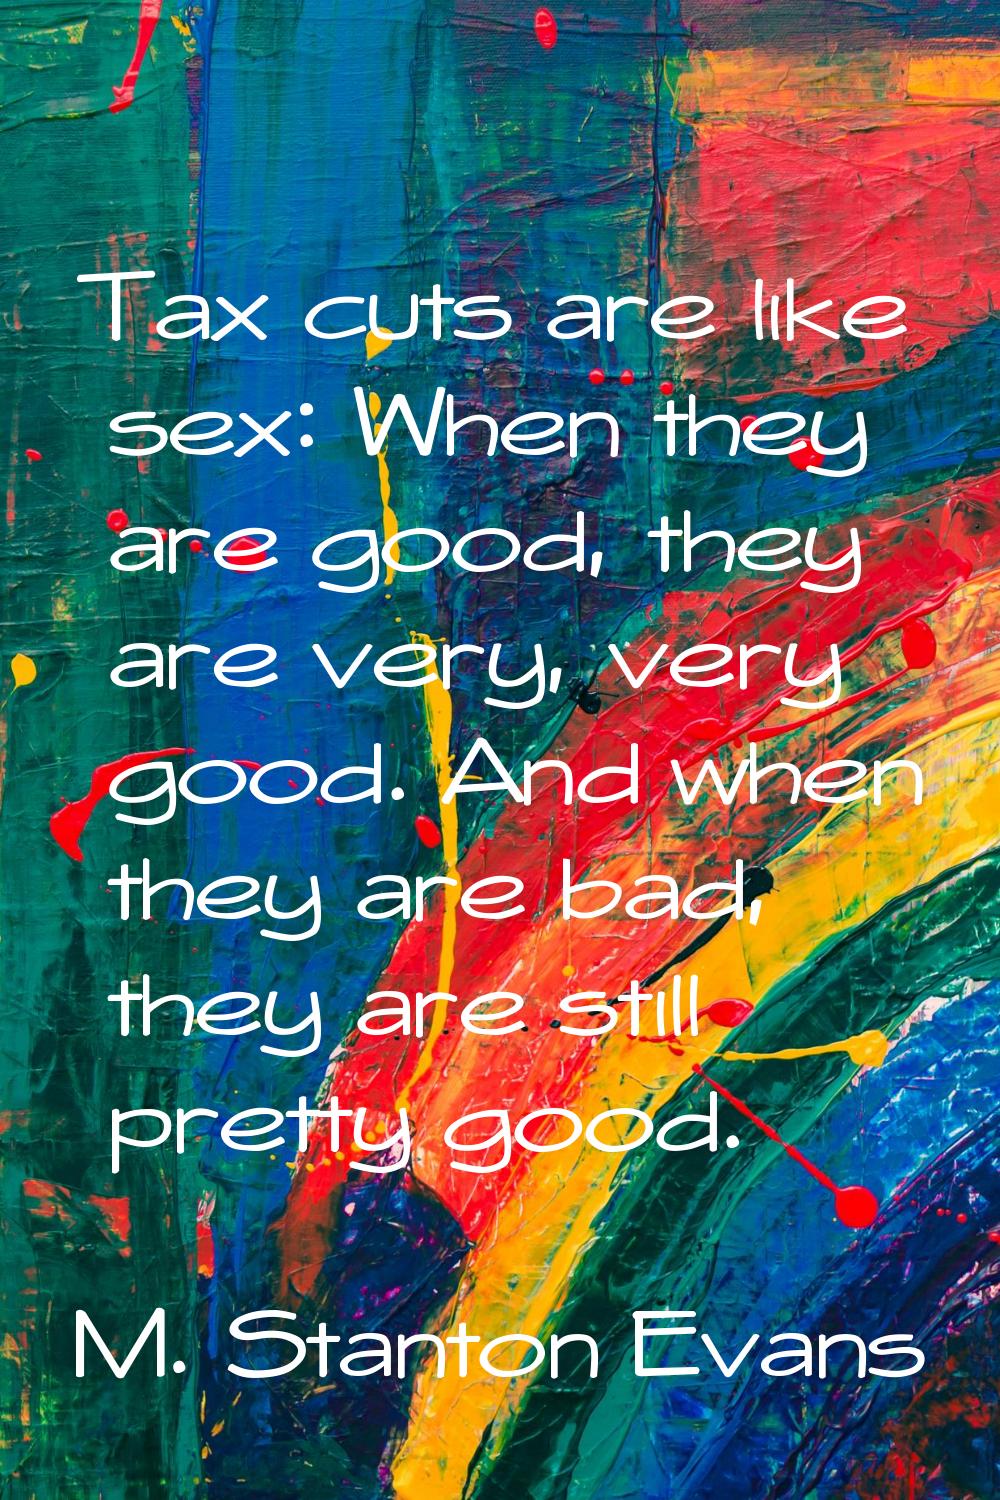 Tax cuts are like sex: When they are good, they are very, very good. And when they are bad, they ar